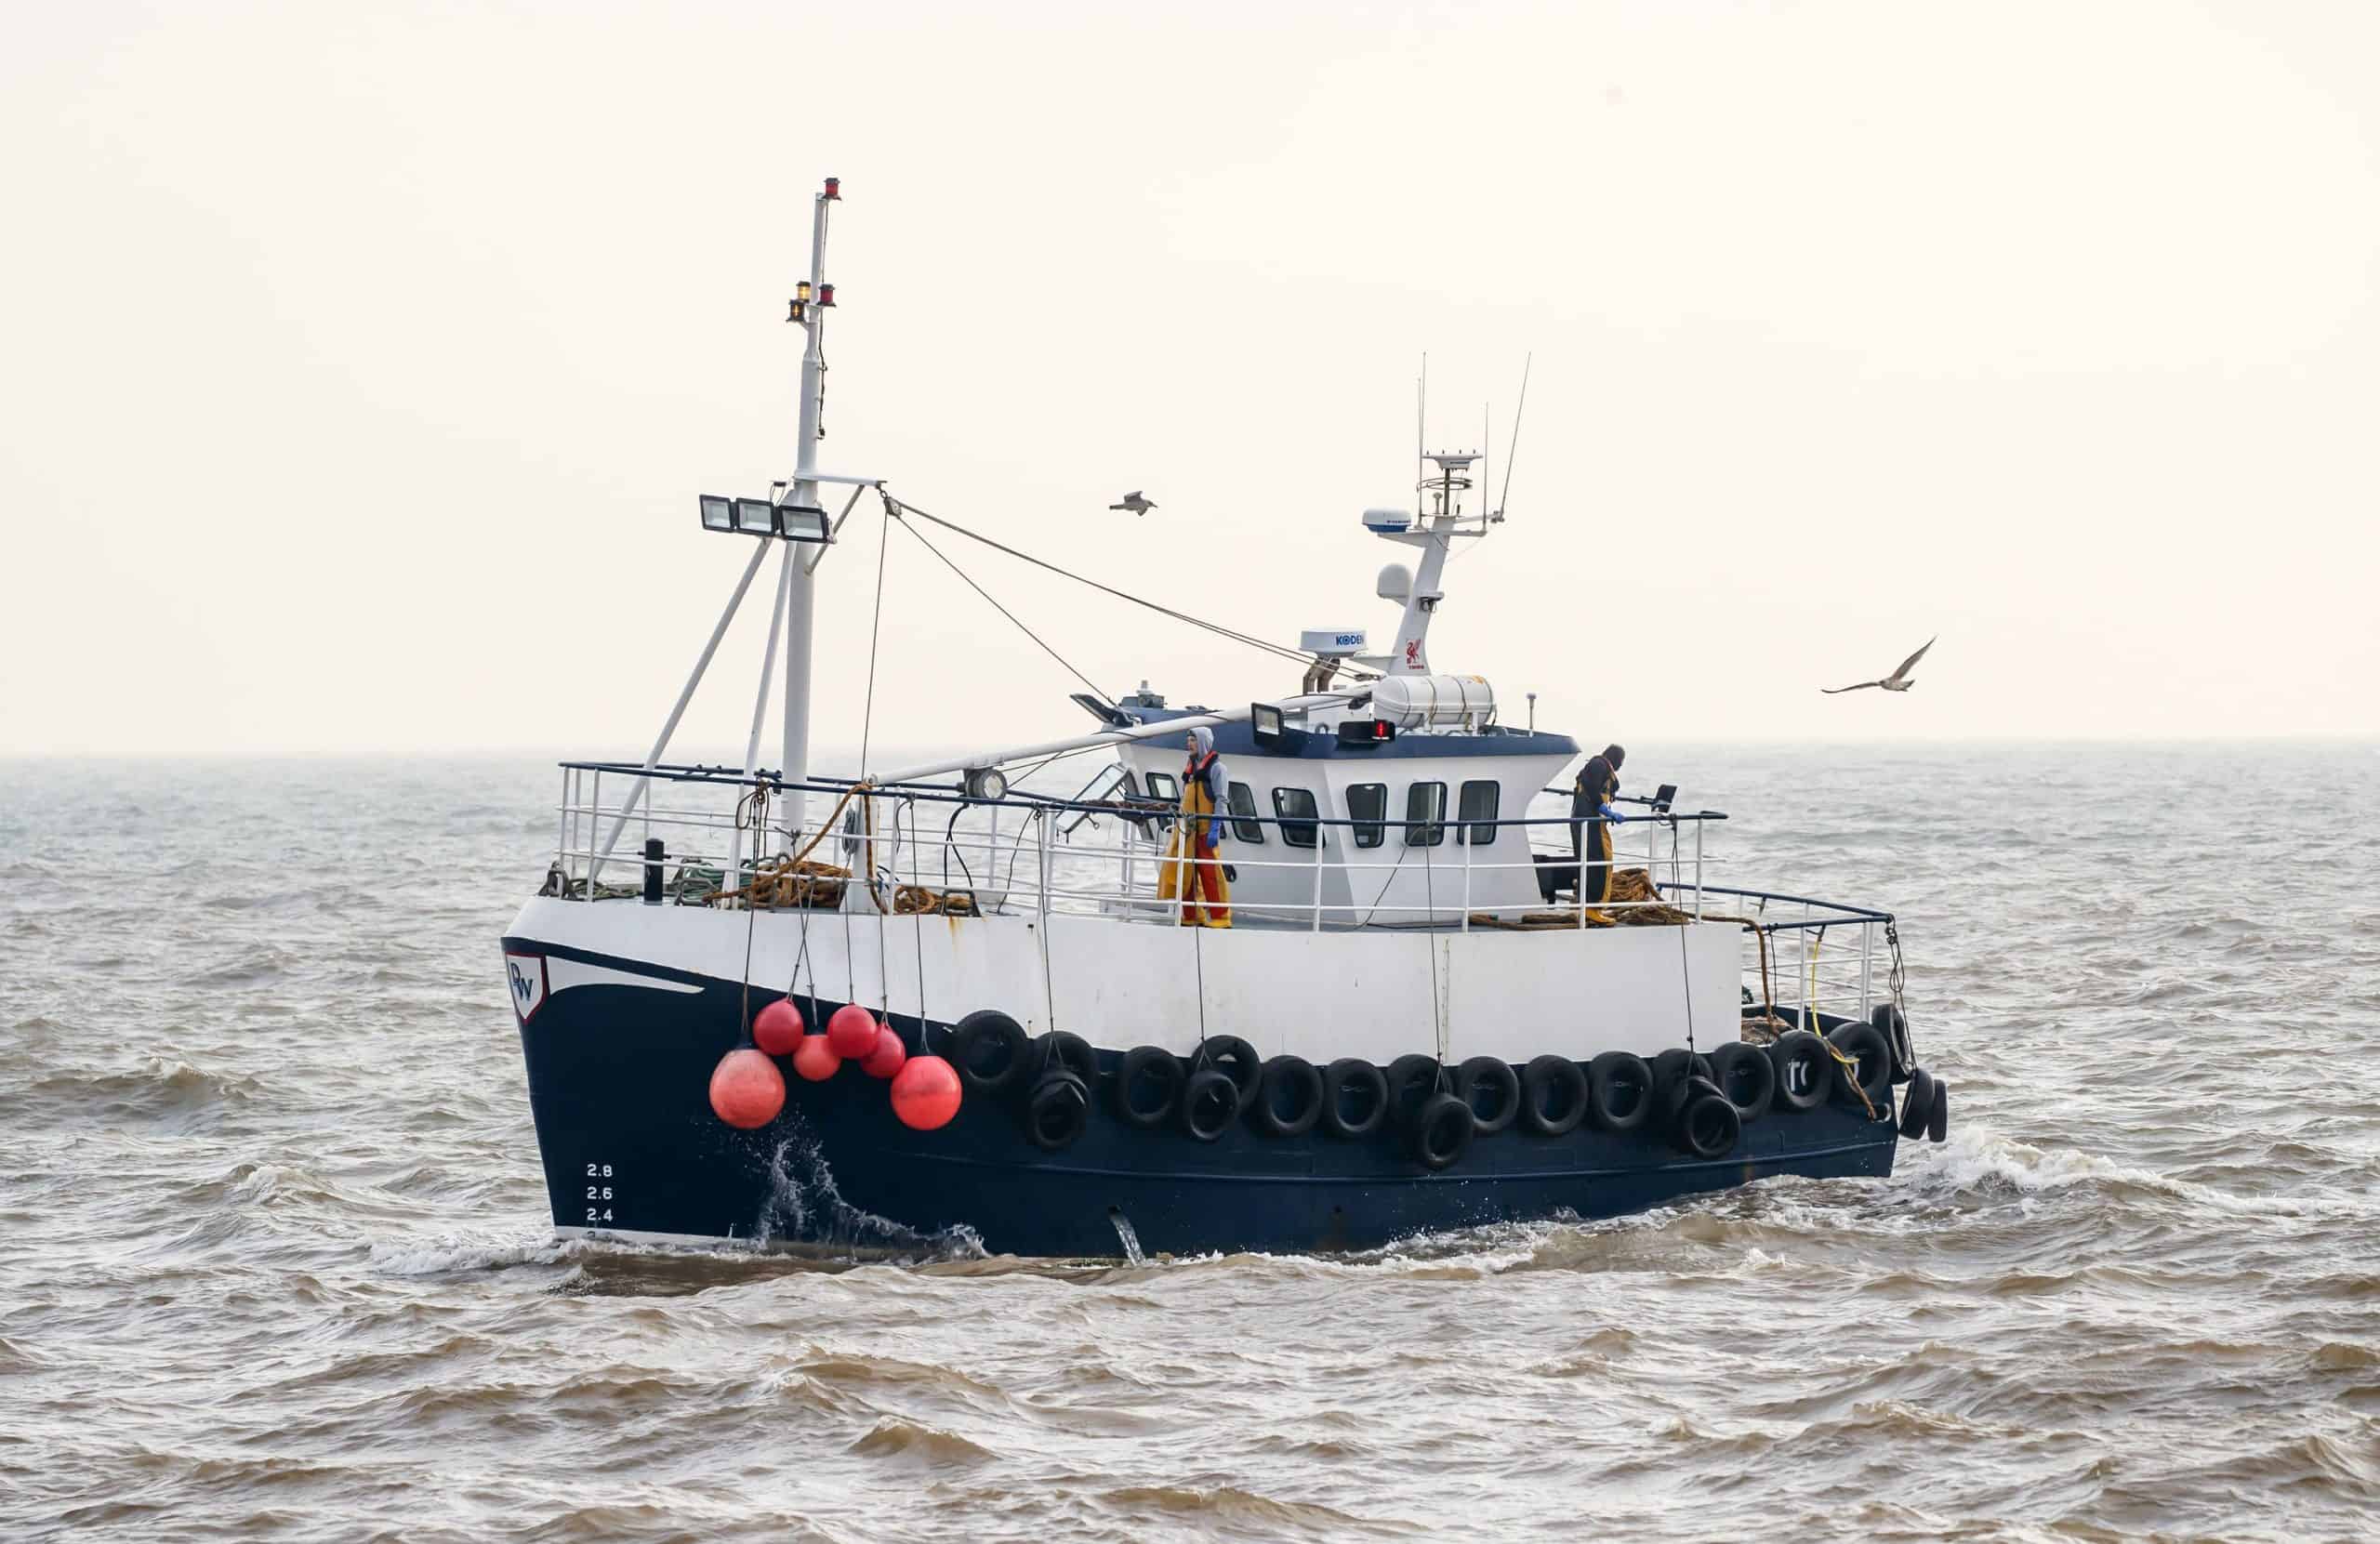 ‘It’s not war, it’s a fight:’ Govt investigating after British trawler detained off France